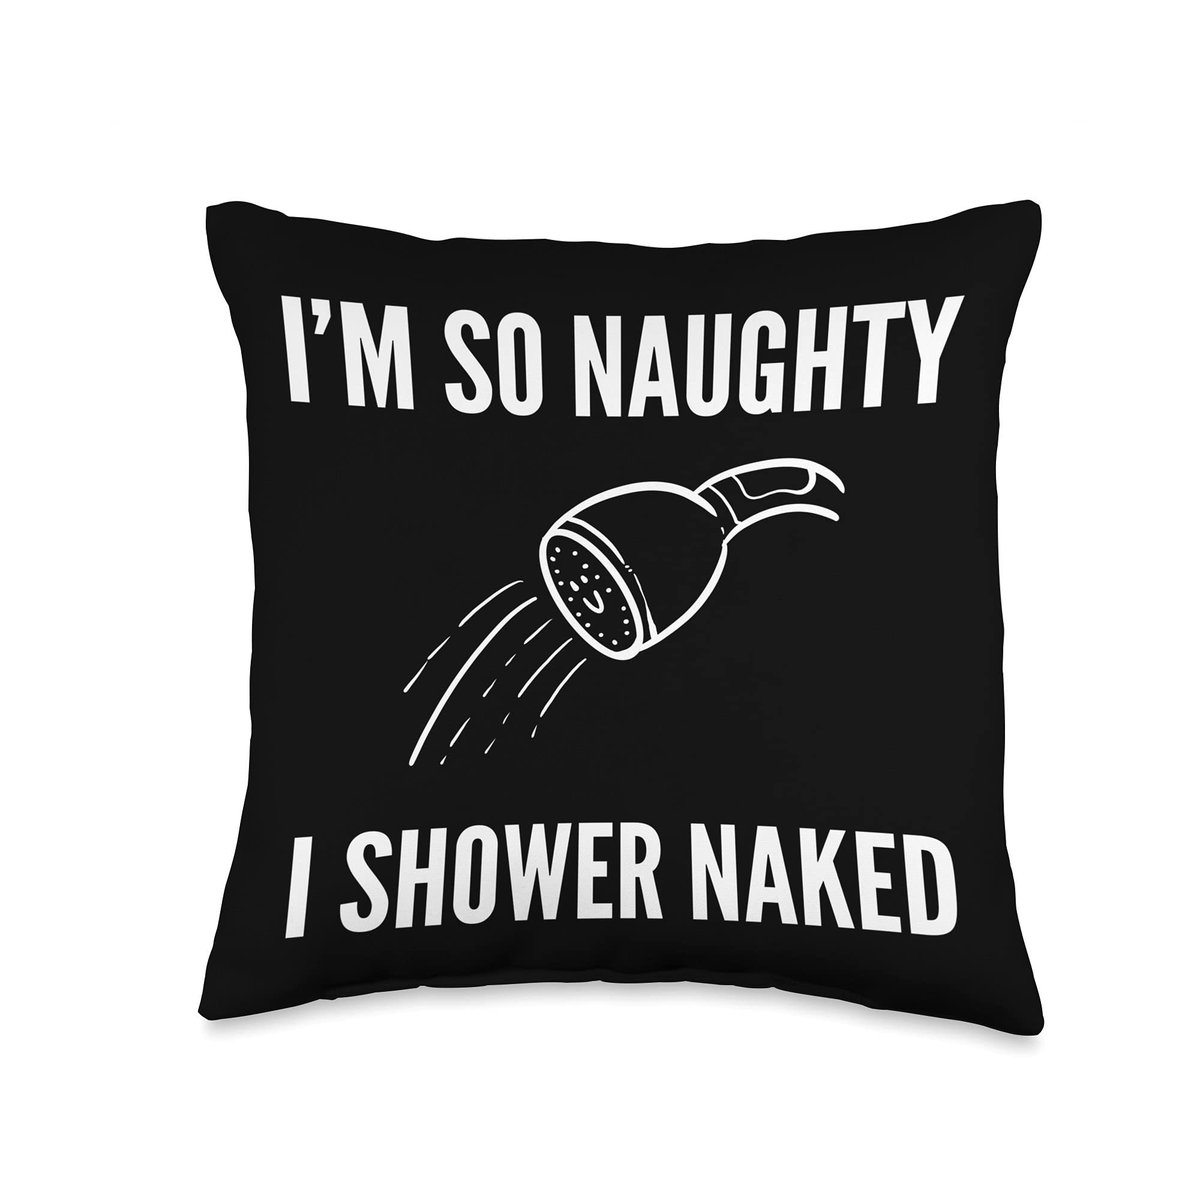 Well, if being a nudist makes me naughty, then I must be the bare’-y best at it! 😂😉😂😉😂 @NancyJustNudism 👉 justnaturism.com 👉 justnudism.net